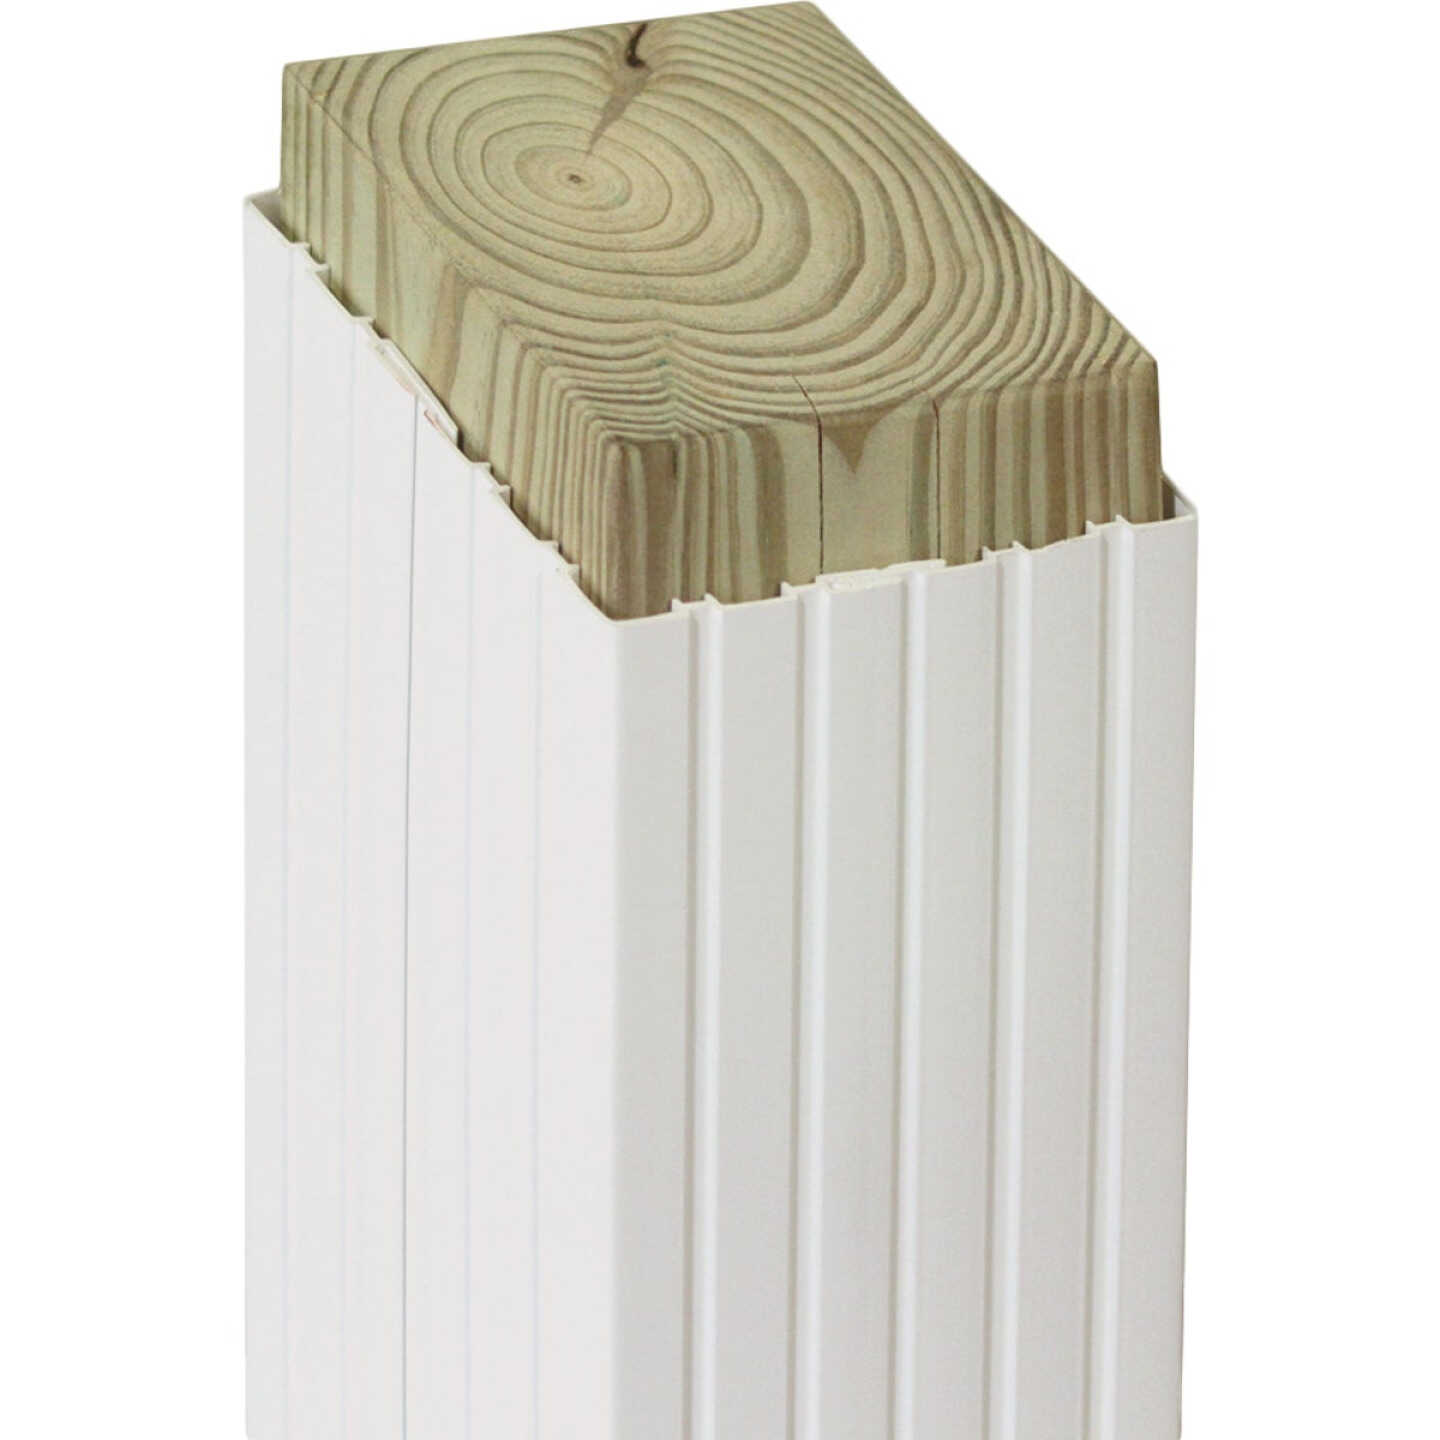 Beechdale 6 In. W. x 6 In. H. x 102 In. L. White PVC Fluted Post Wrap Image 1